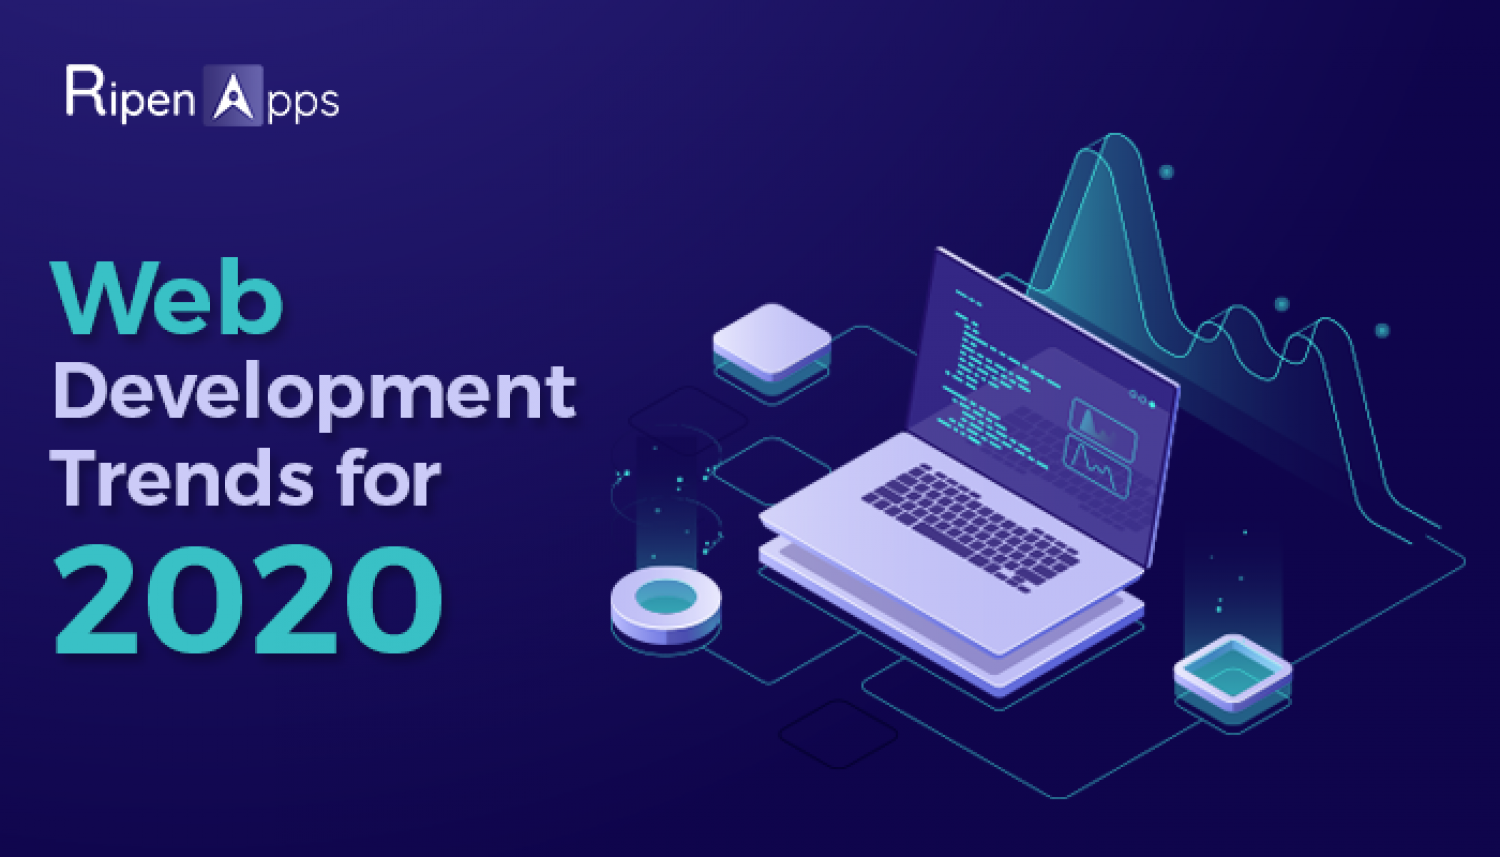 Web Development Trends for 2020 Infographic